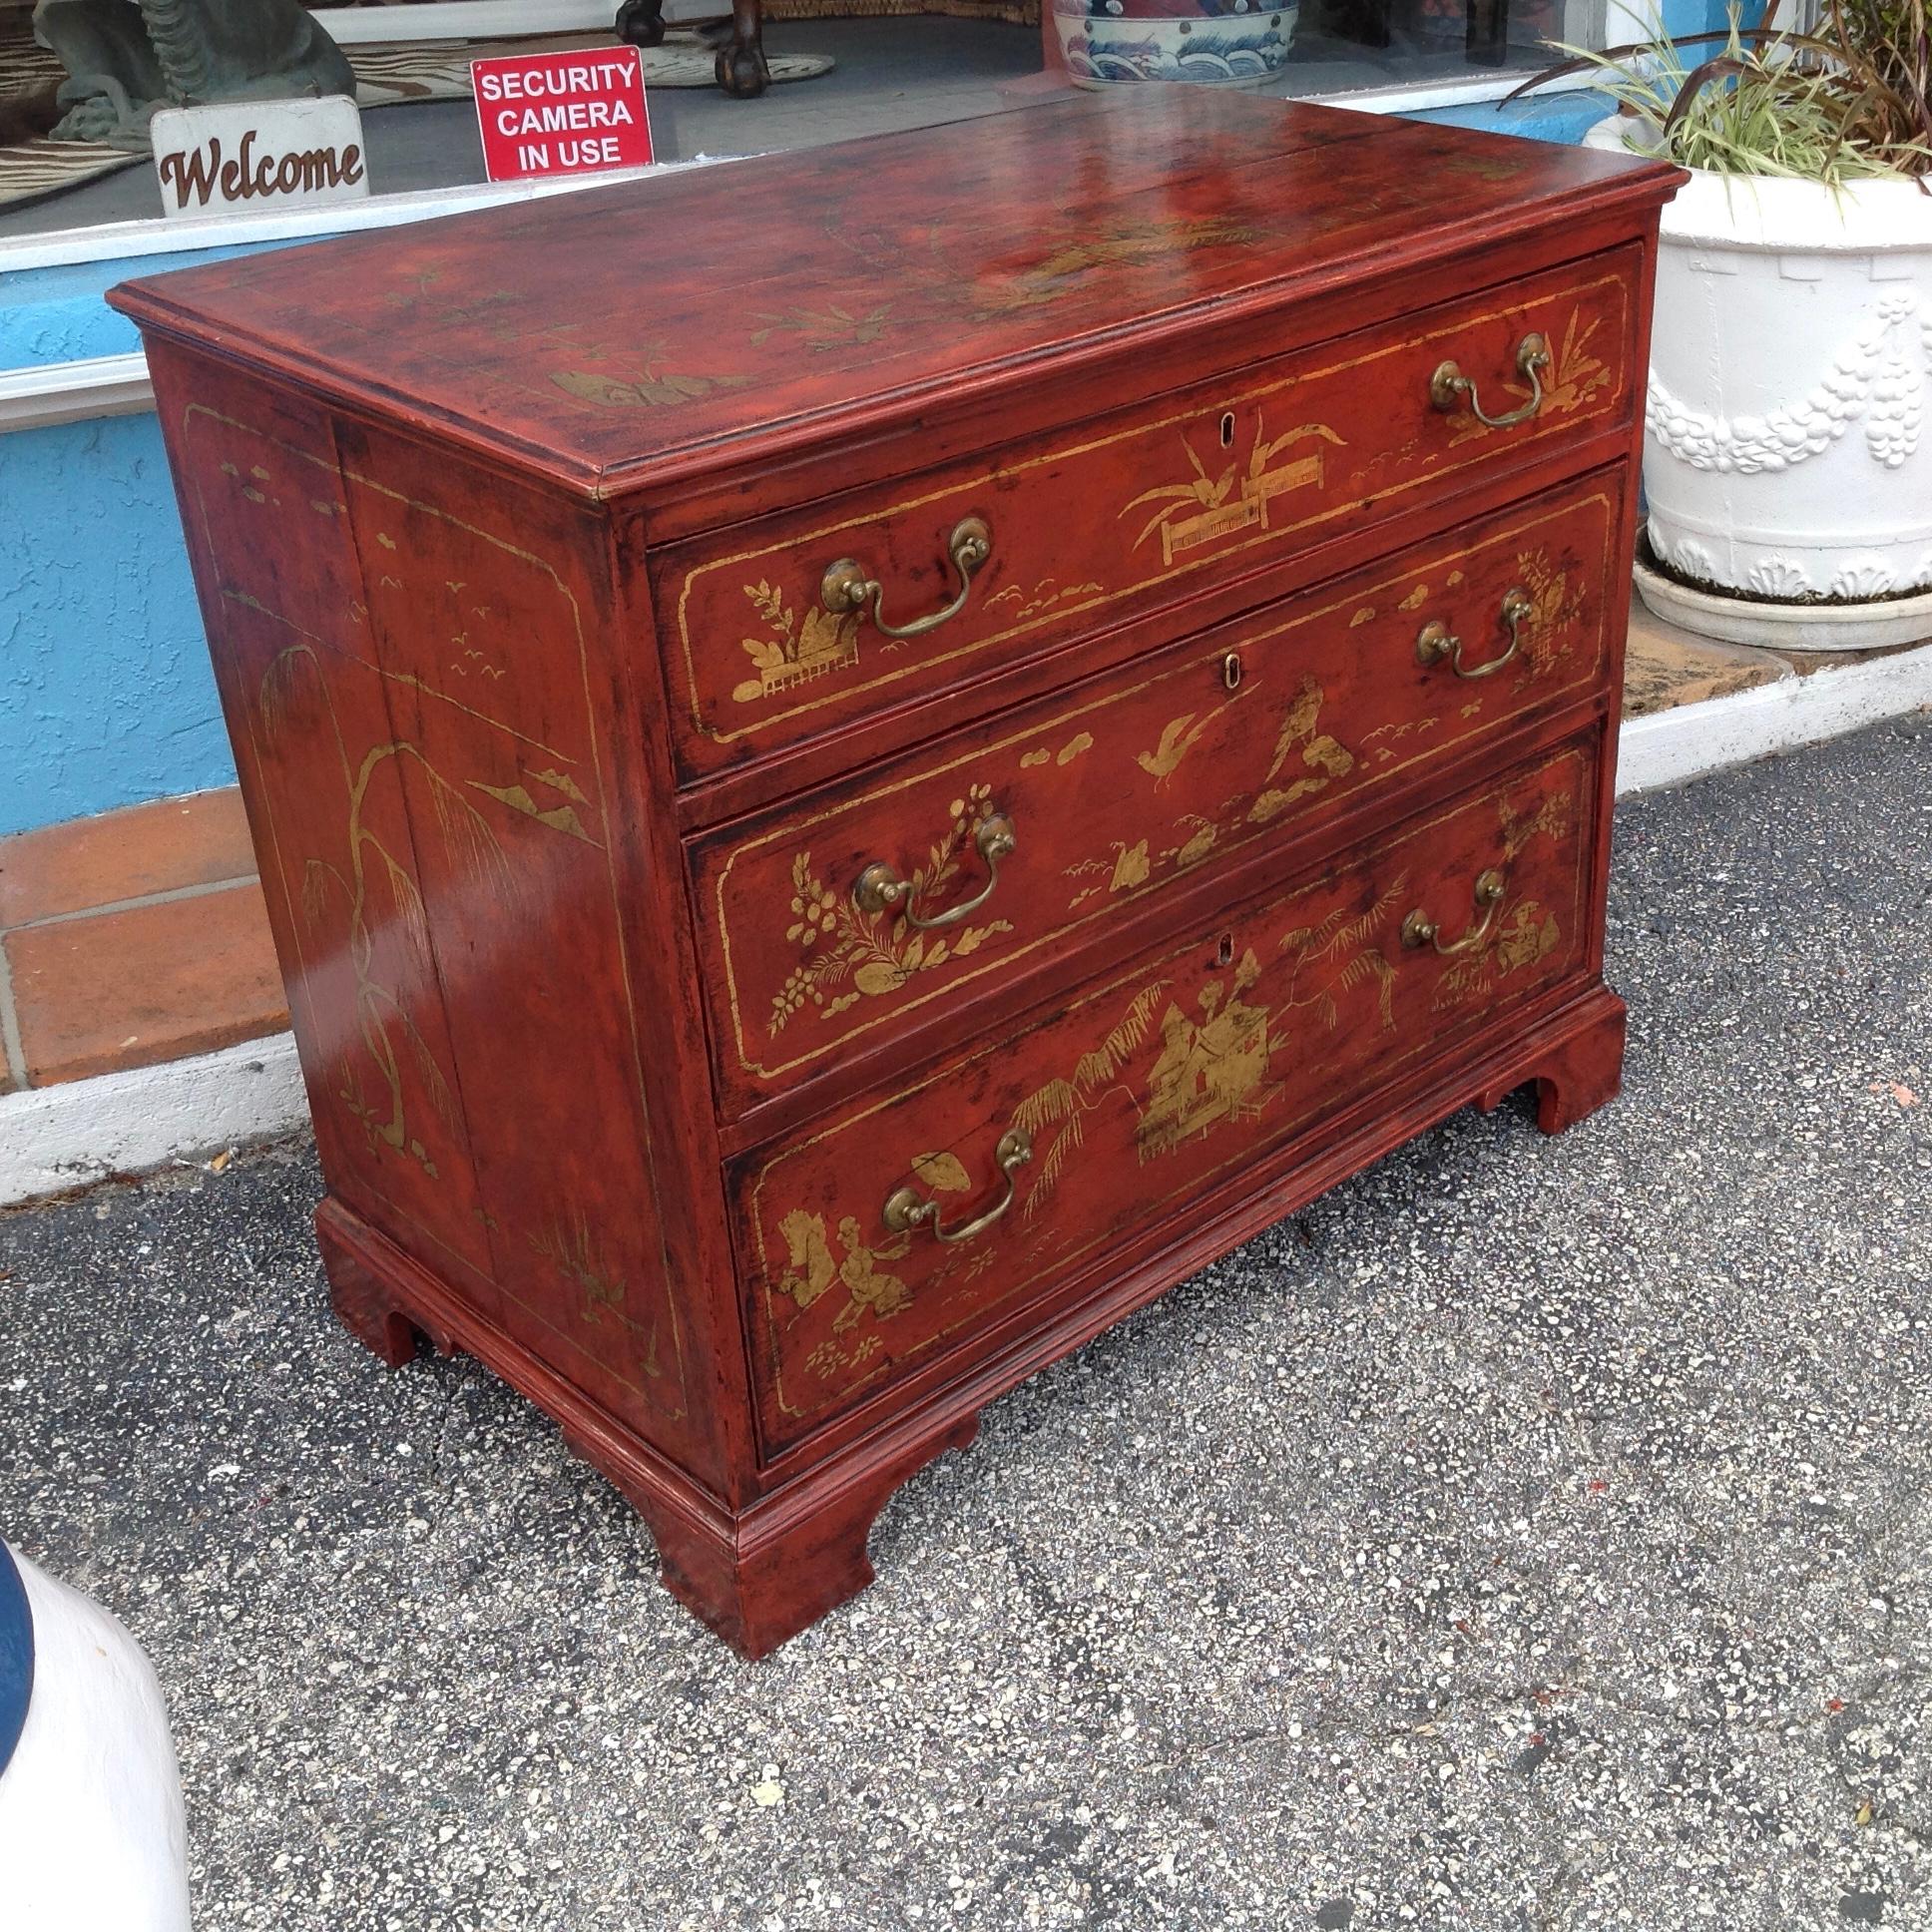 Exquisite quality and design.
Wonderful Chinese red background with fine gilt appointments 
featuring flora and birds.